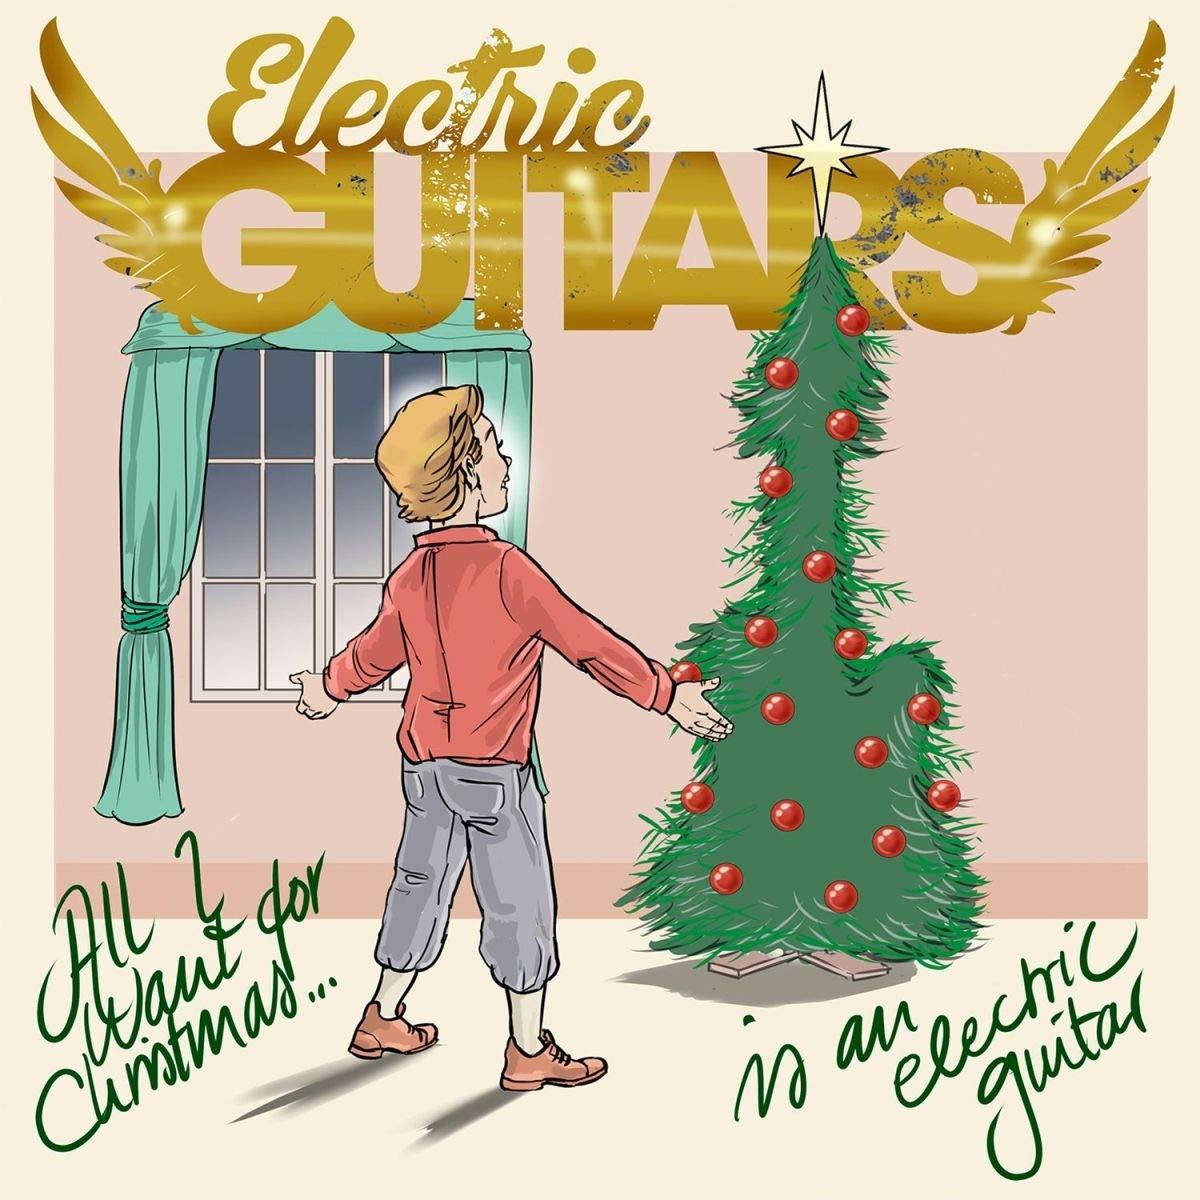 Electric Guitars - -COLOURED- (analog)) I WANT.. 7-ALL (EP 